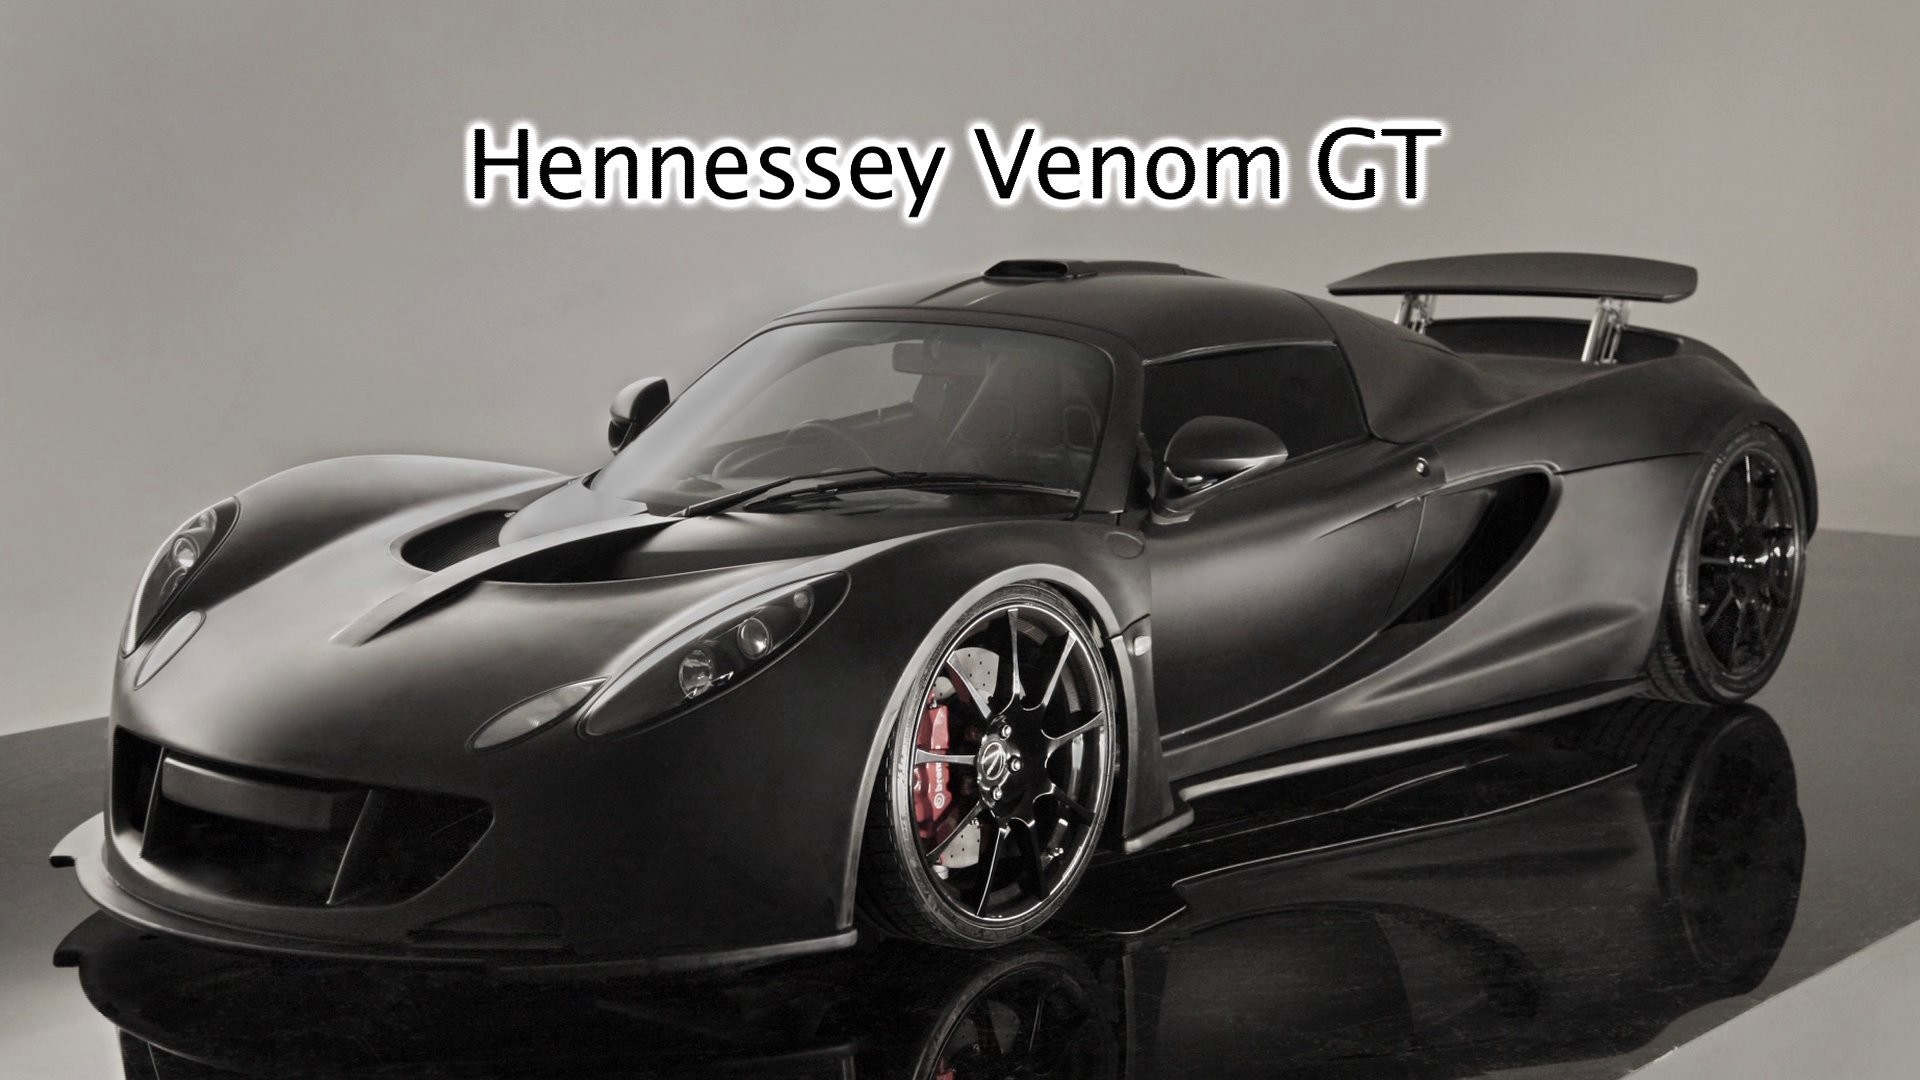 1920x1080 SEALY, TX – Everyone knows the Bugatti Veyron is the fastest production car  in the world, right? Wrong. The Hennessey Venom GT now holds that record.